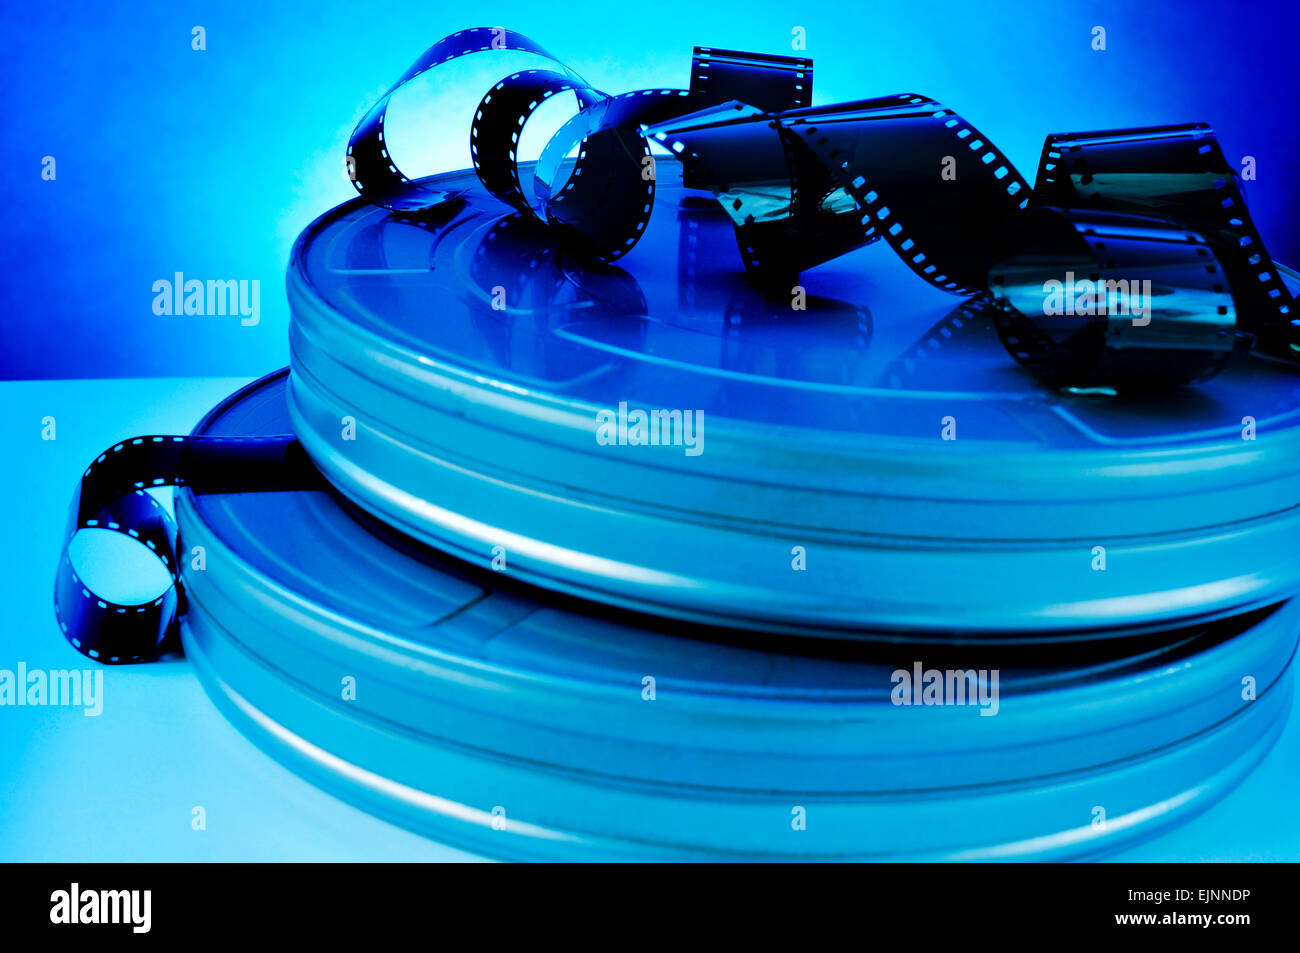 https://c8.alamy.com/comp/EJNNDP/some-film-strips-and-metal-movie-film-reel-canisters-on-a-table-with-EJNNDP.jpg